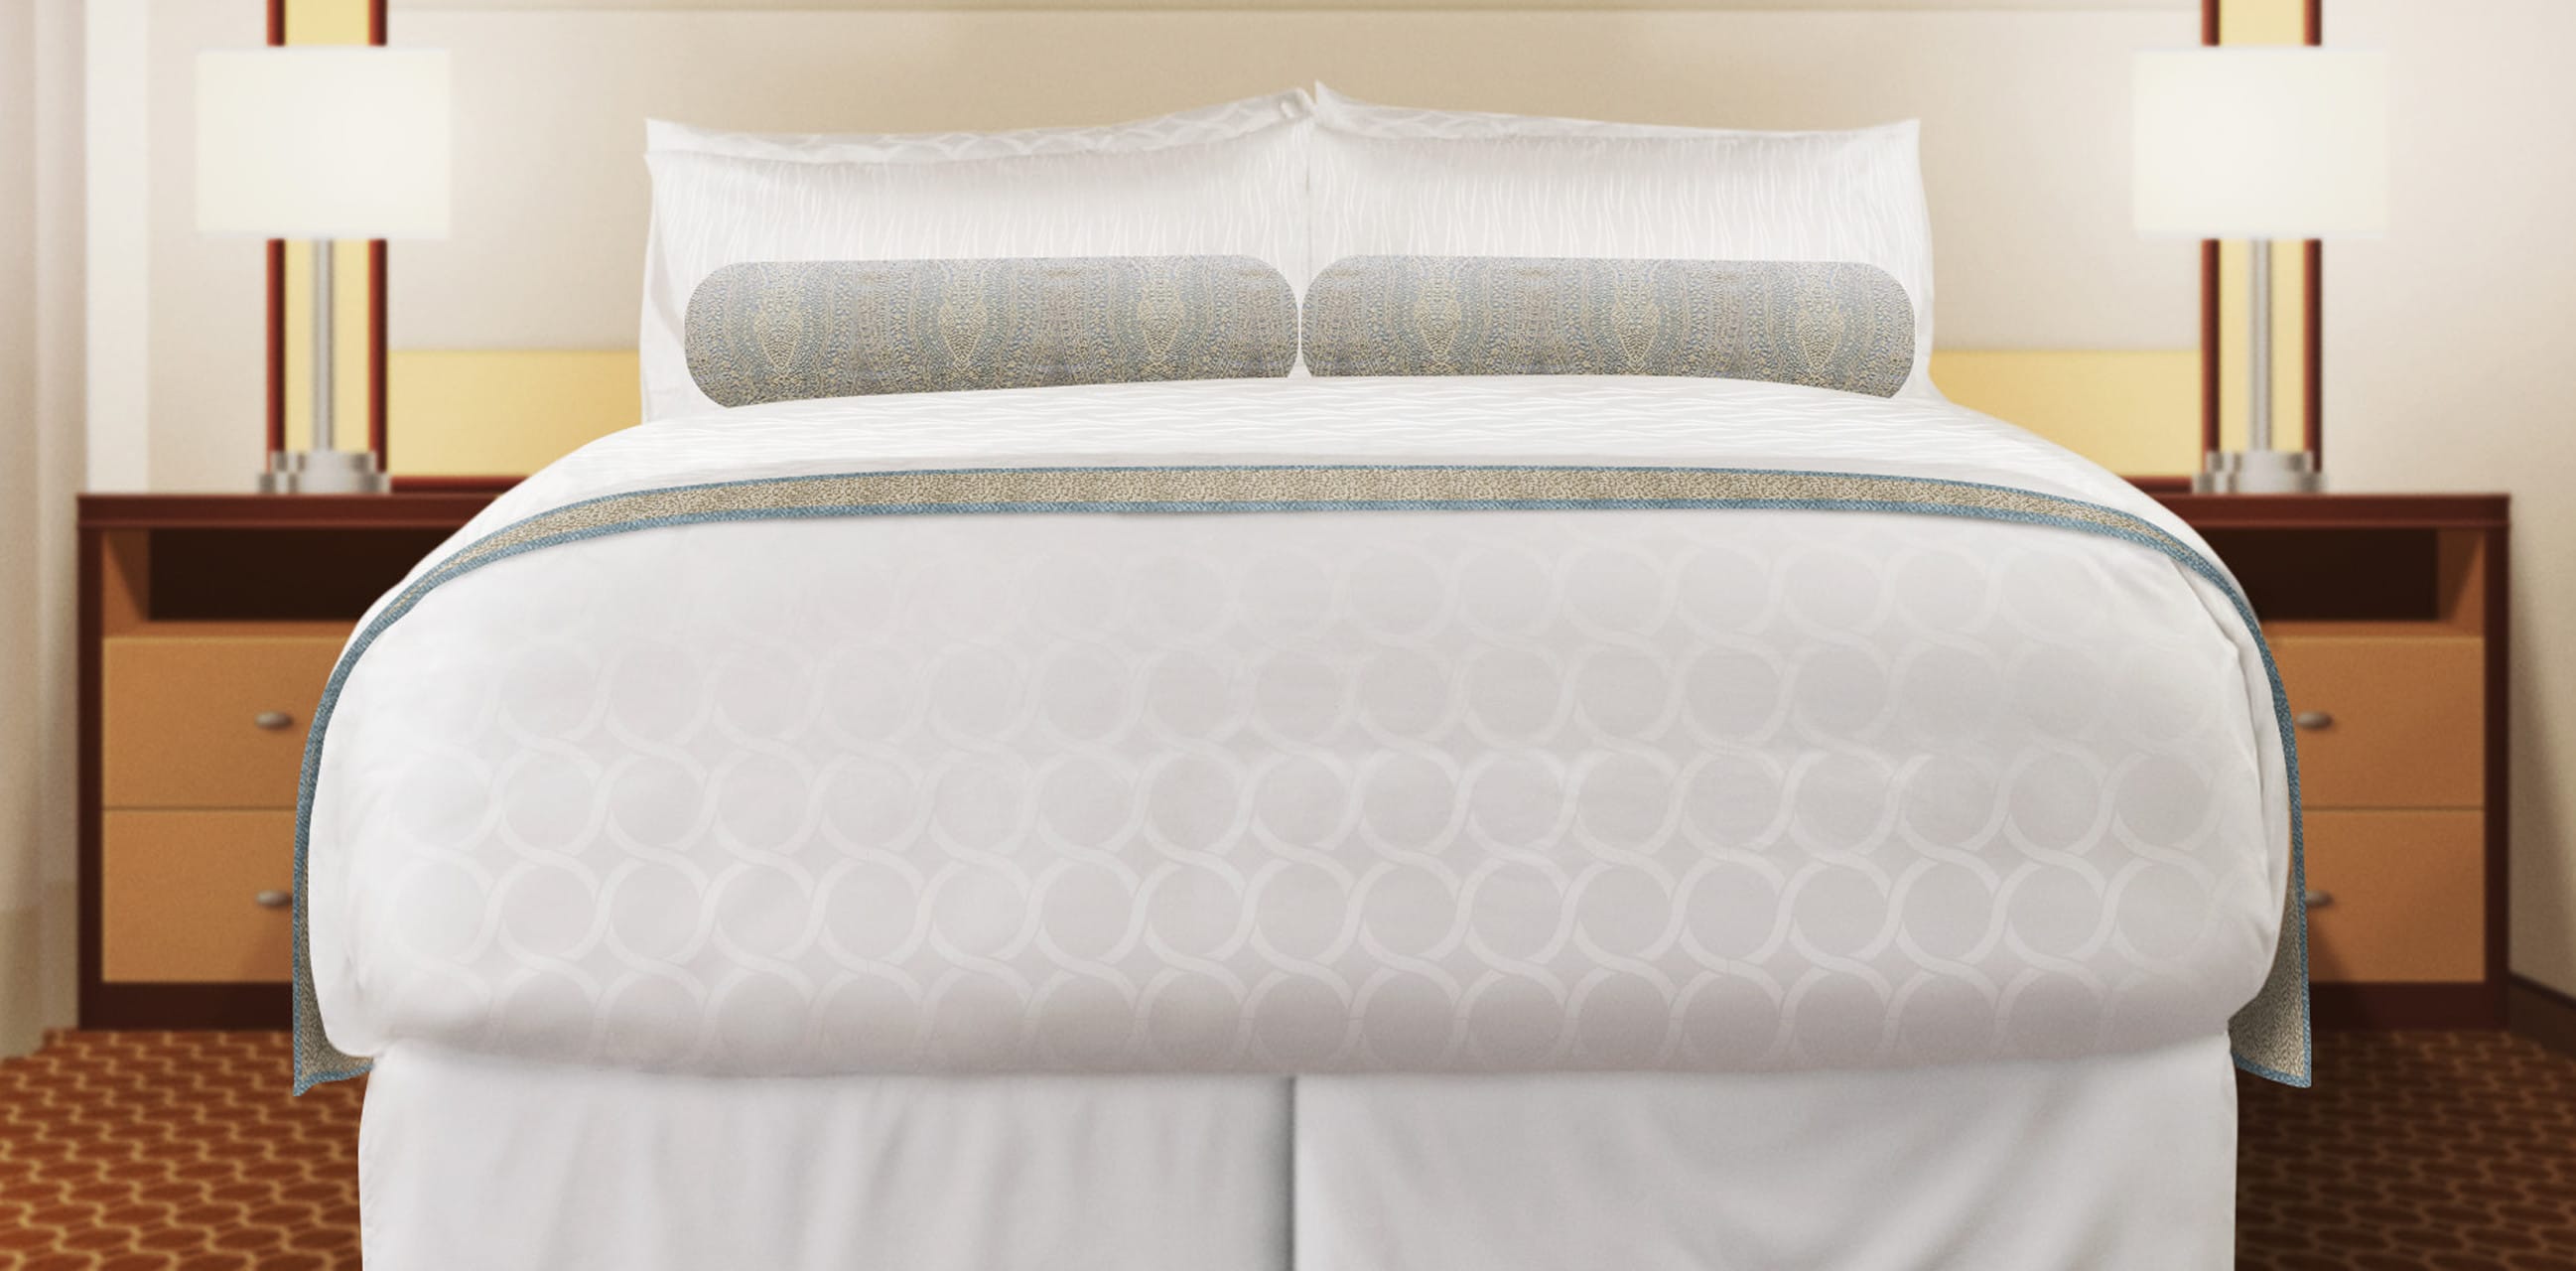 Sobel Westex bed linens and bed pillows on a beautiful bed in Princess Cruises cabin